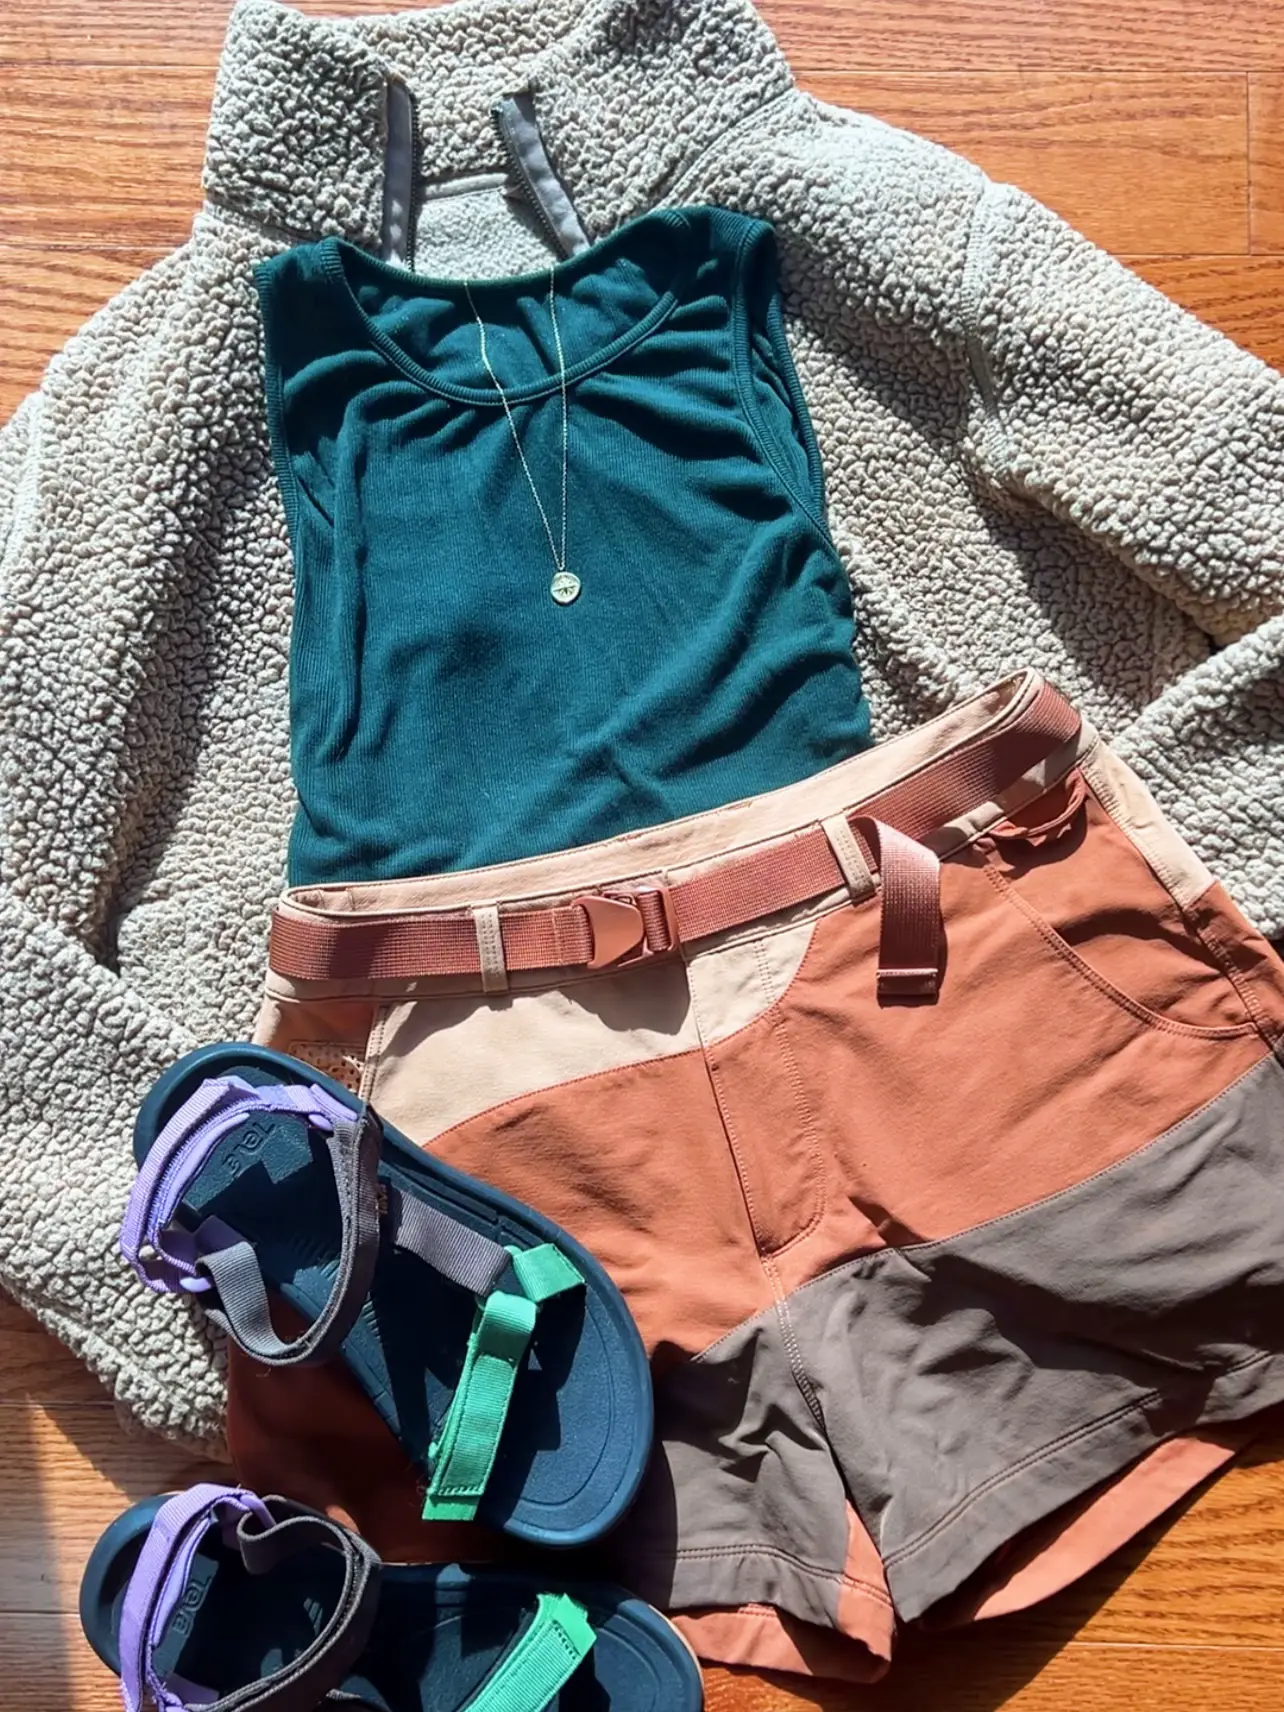 Cute hiking outfit, cute adventuring outfit, or even a cute camping outfit.  Just love this style